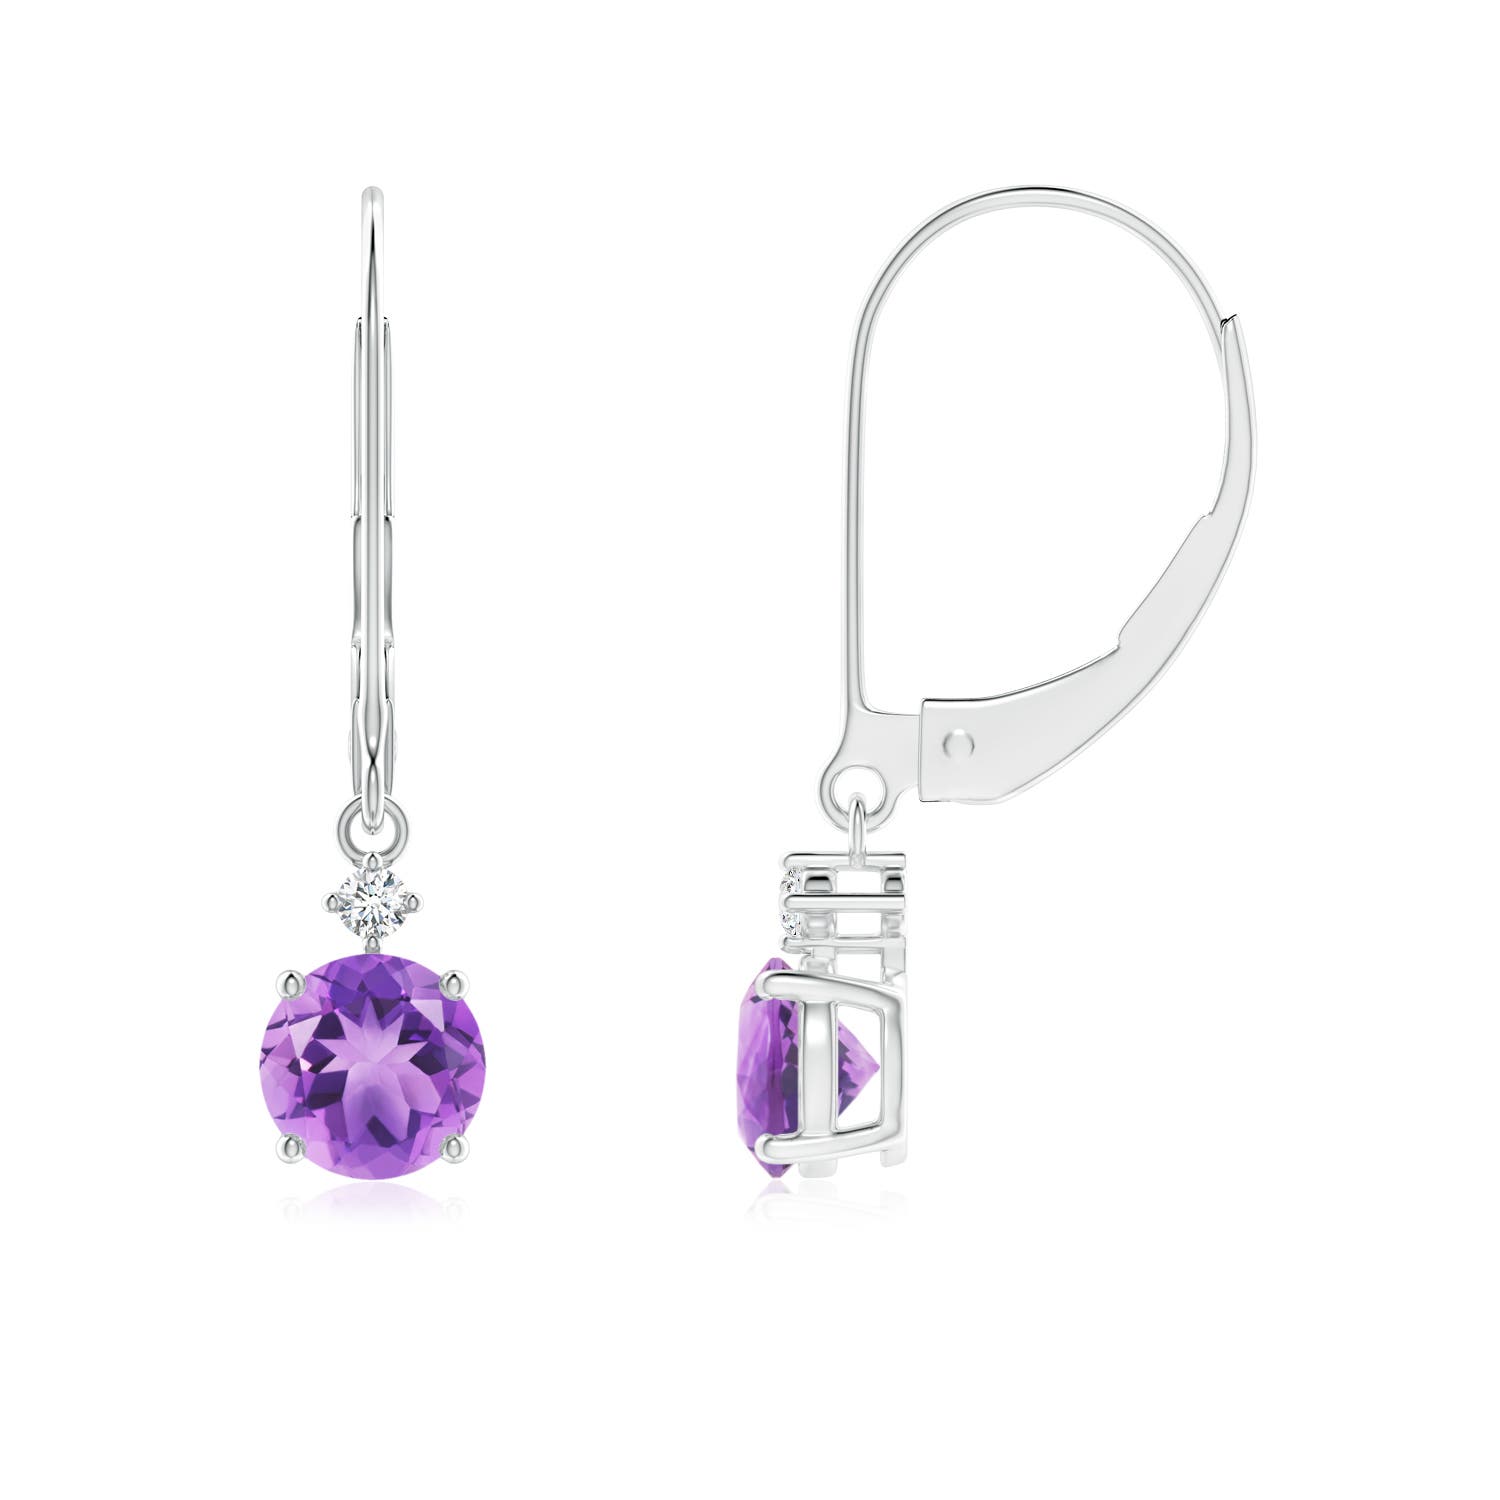 A - Amethyst / 0.94 CT / 14 KT White Gold